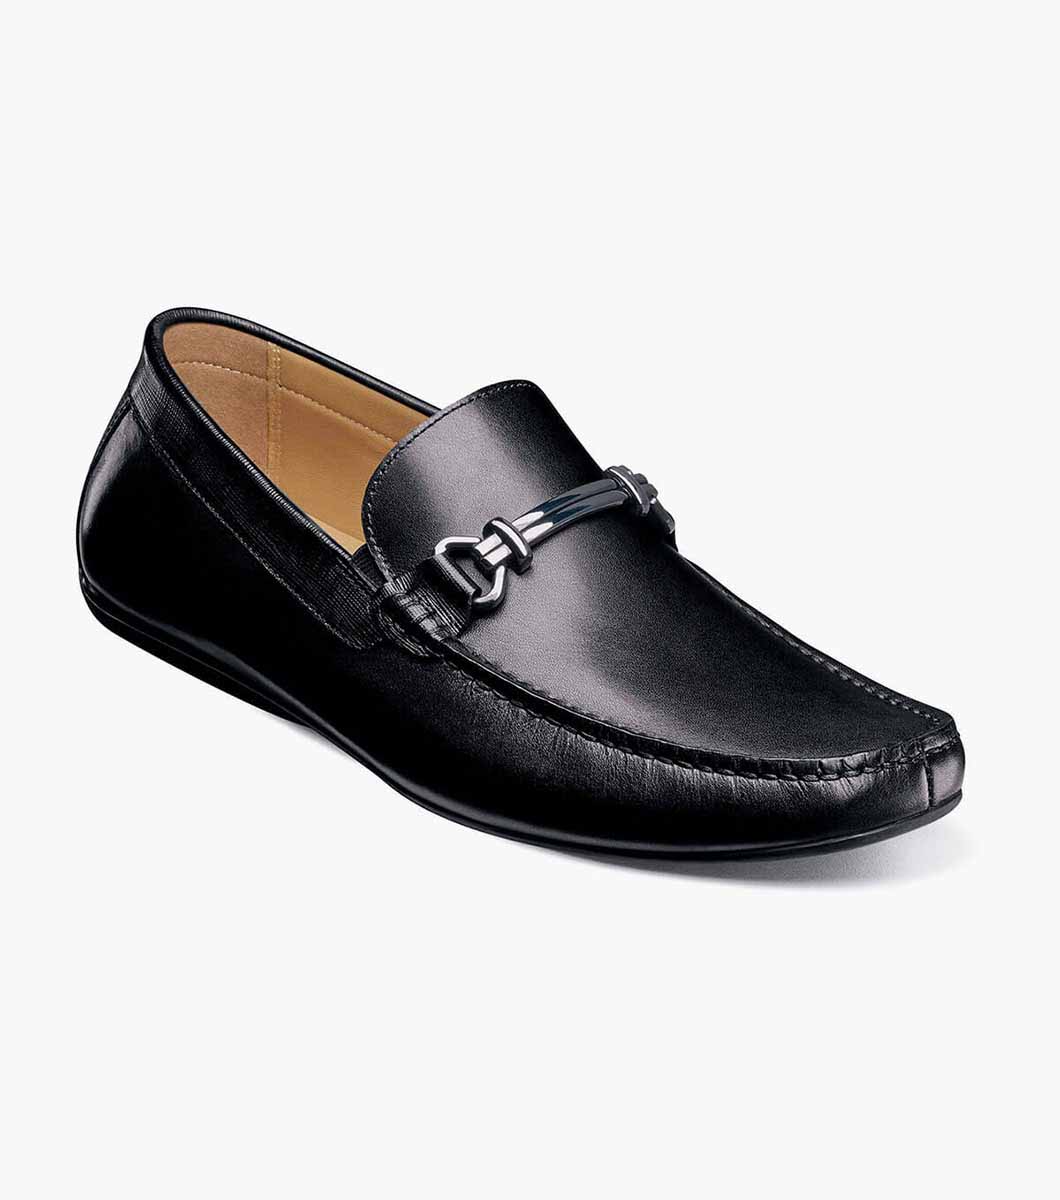 The Vicino Shoe Bit Dress Loafer